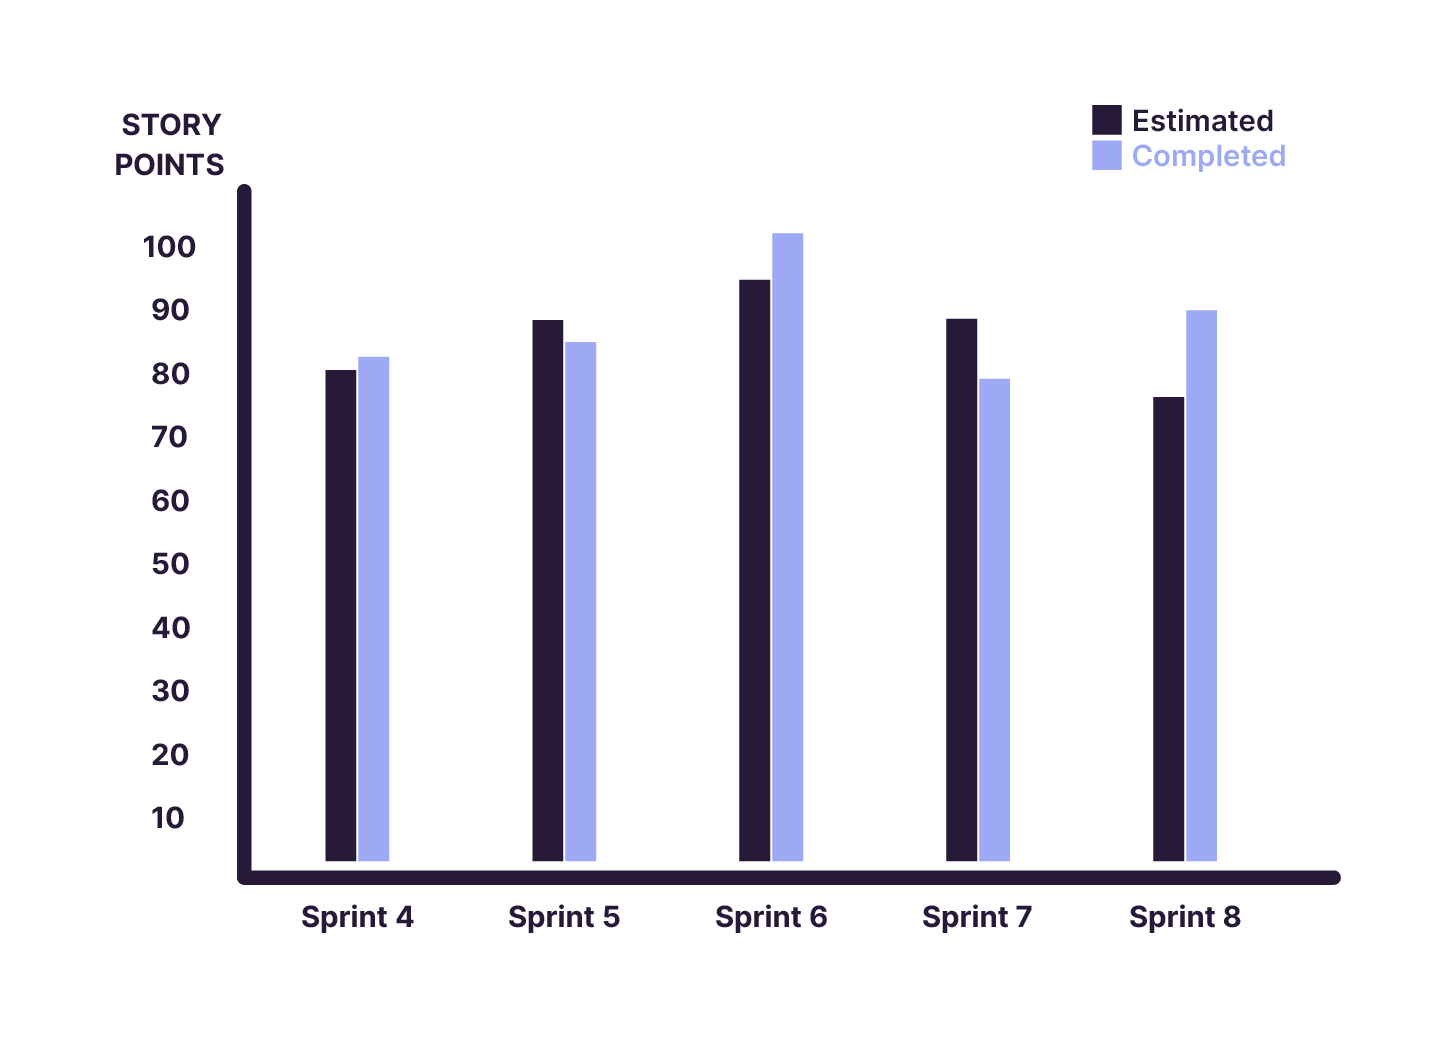 A chart that shows the estimated and completed Story Points for six Sprints